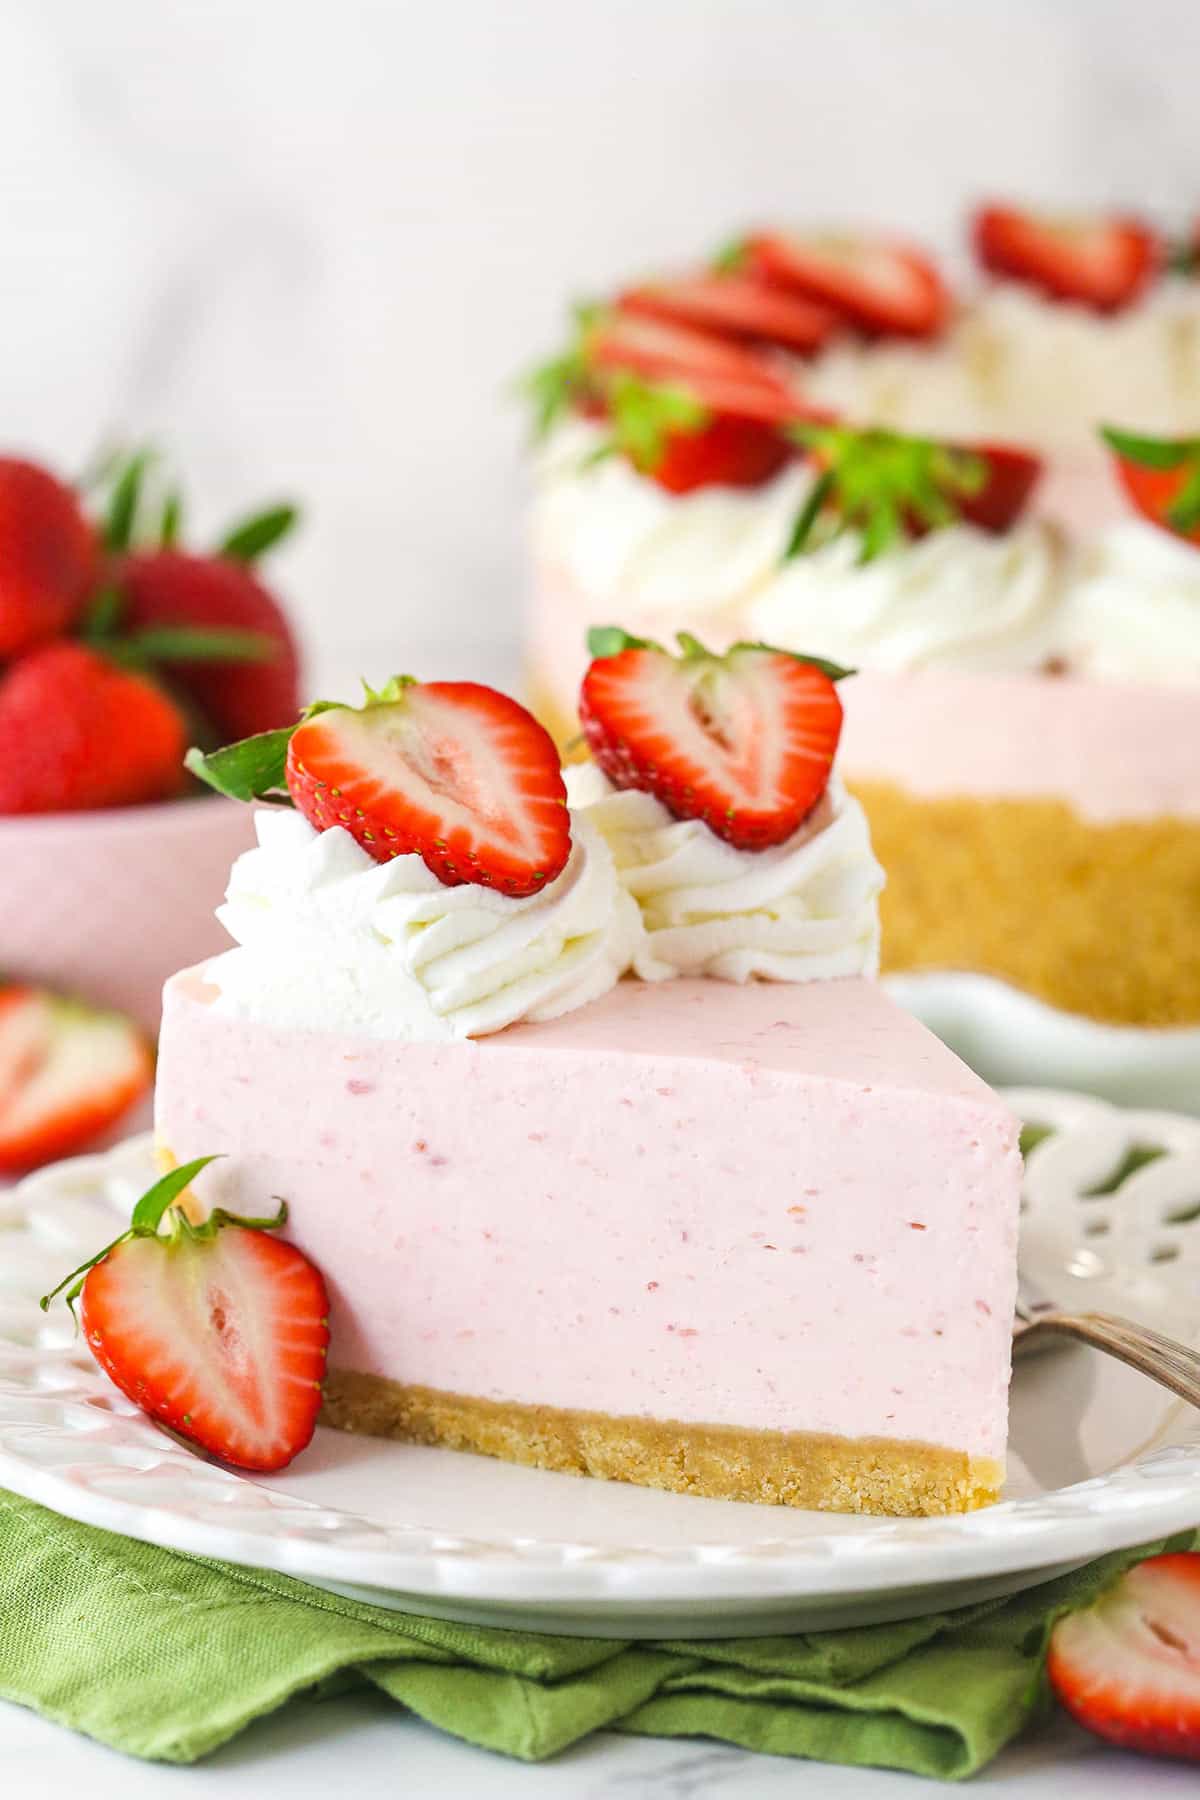 A slice of no bake strawberry cheesecake served on a plate with a fork near a full cheesecake and a bowl of fresh strawberries.